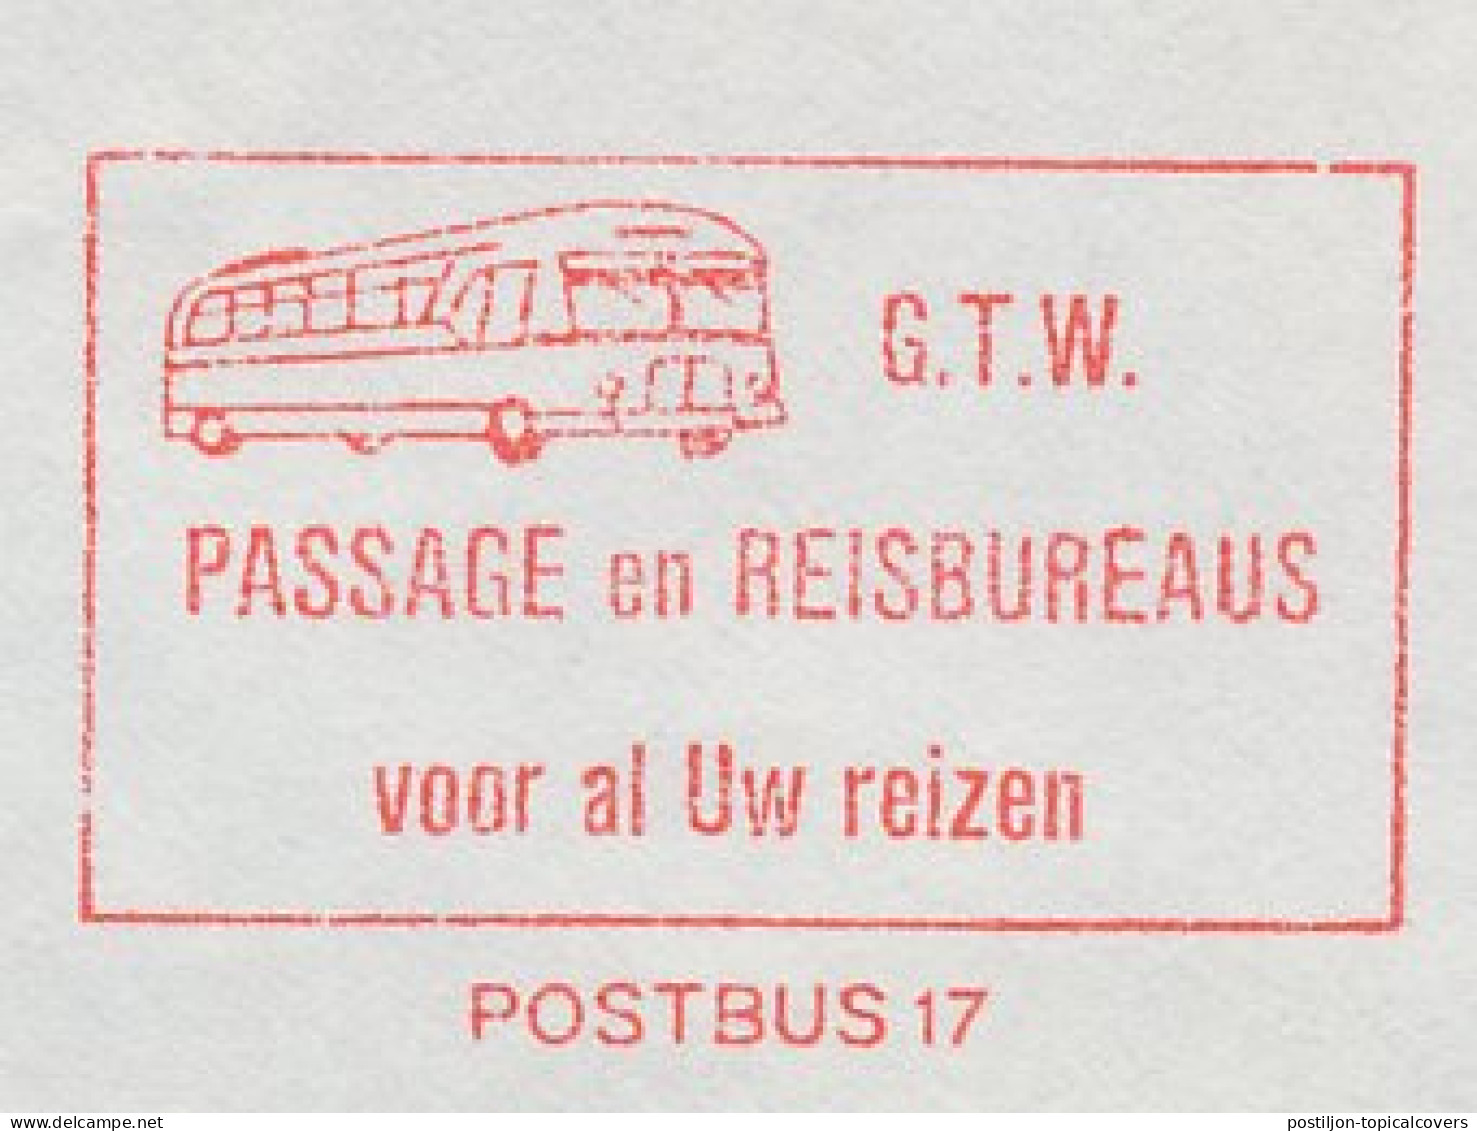 Meter Cover Netherlands 1971 Bus - GTW - Tramway Comany - Doetinchem - Busses